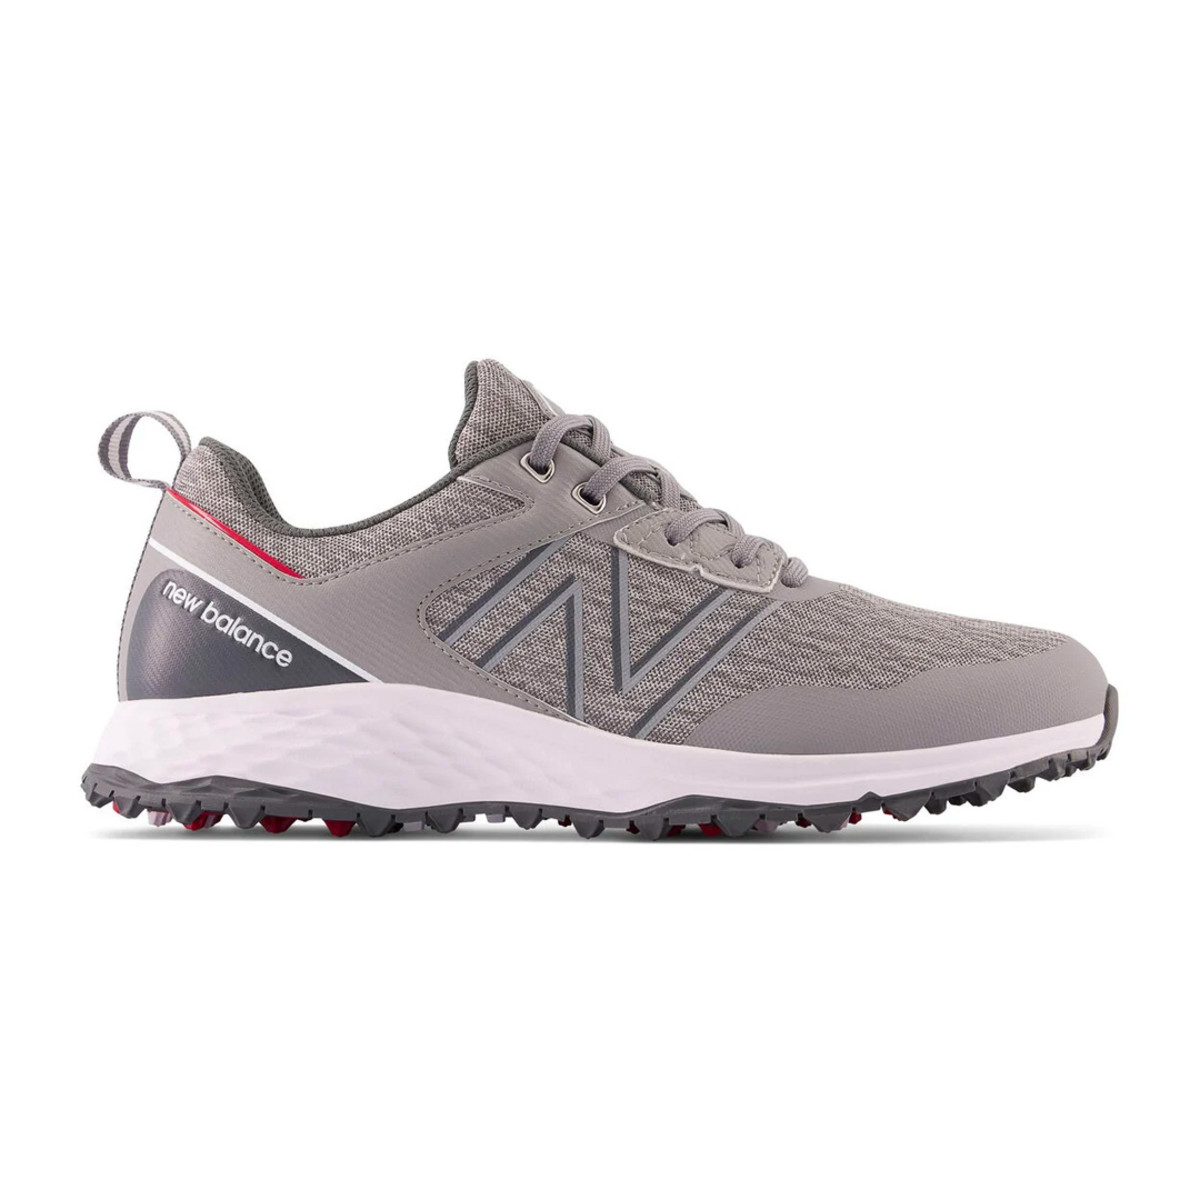 the new balance fresh foam contend sl golf shoes, seen here in charcoal, are on sale at pga tour super store